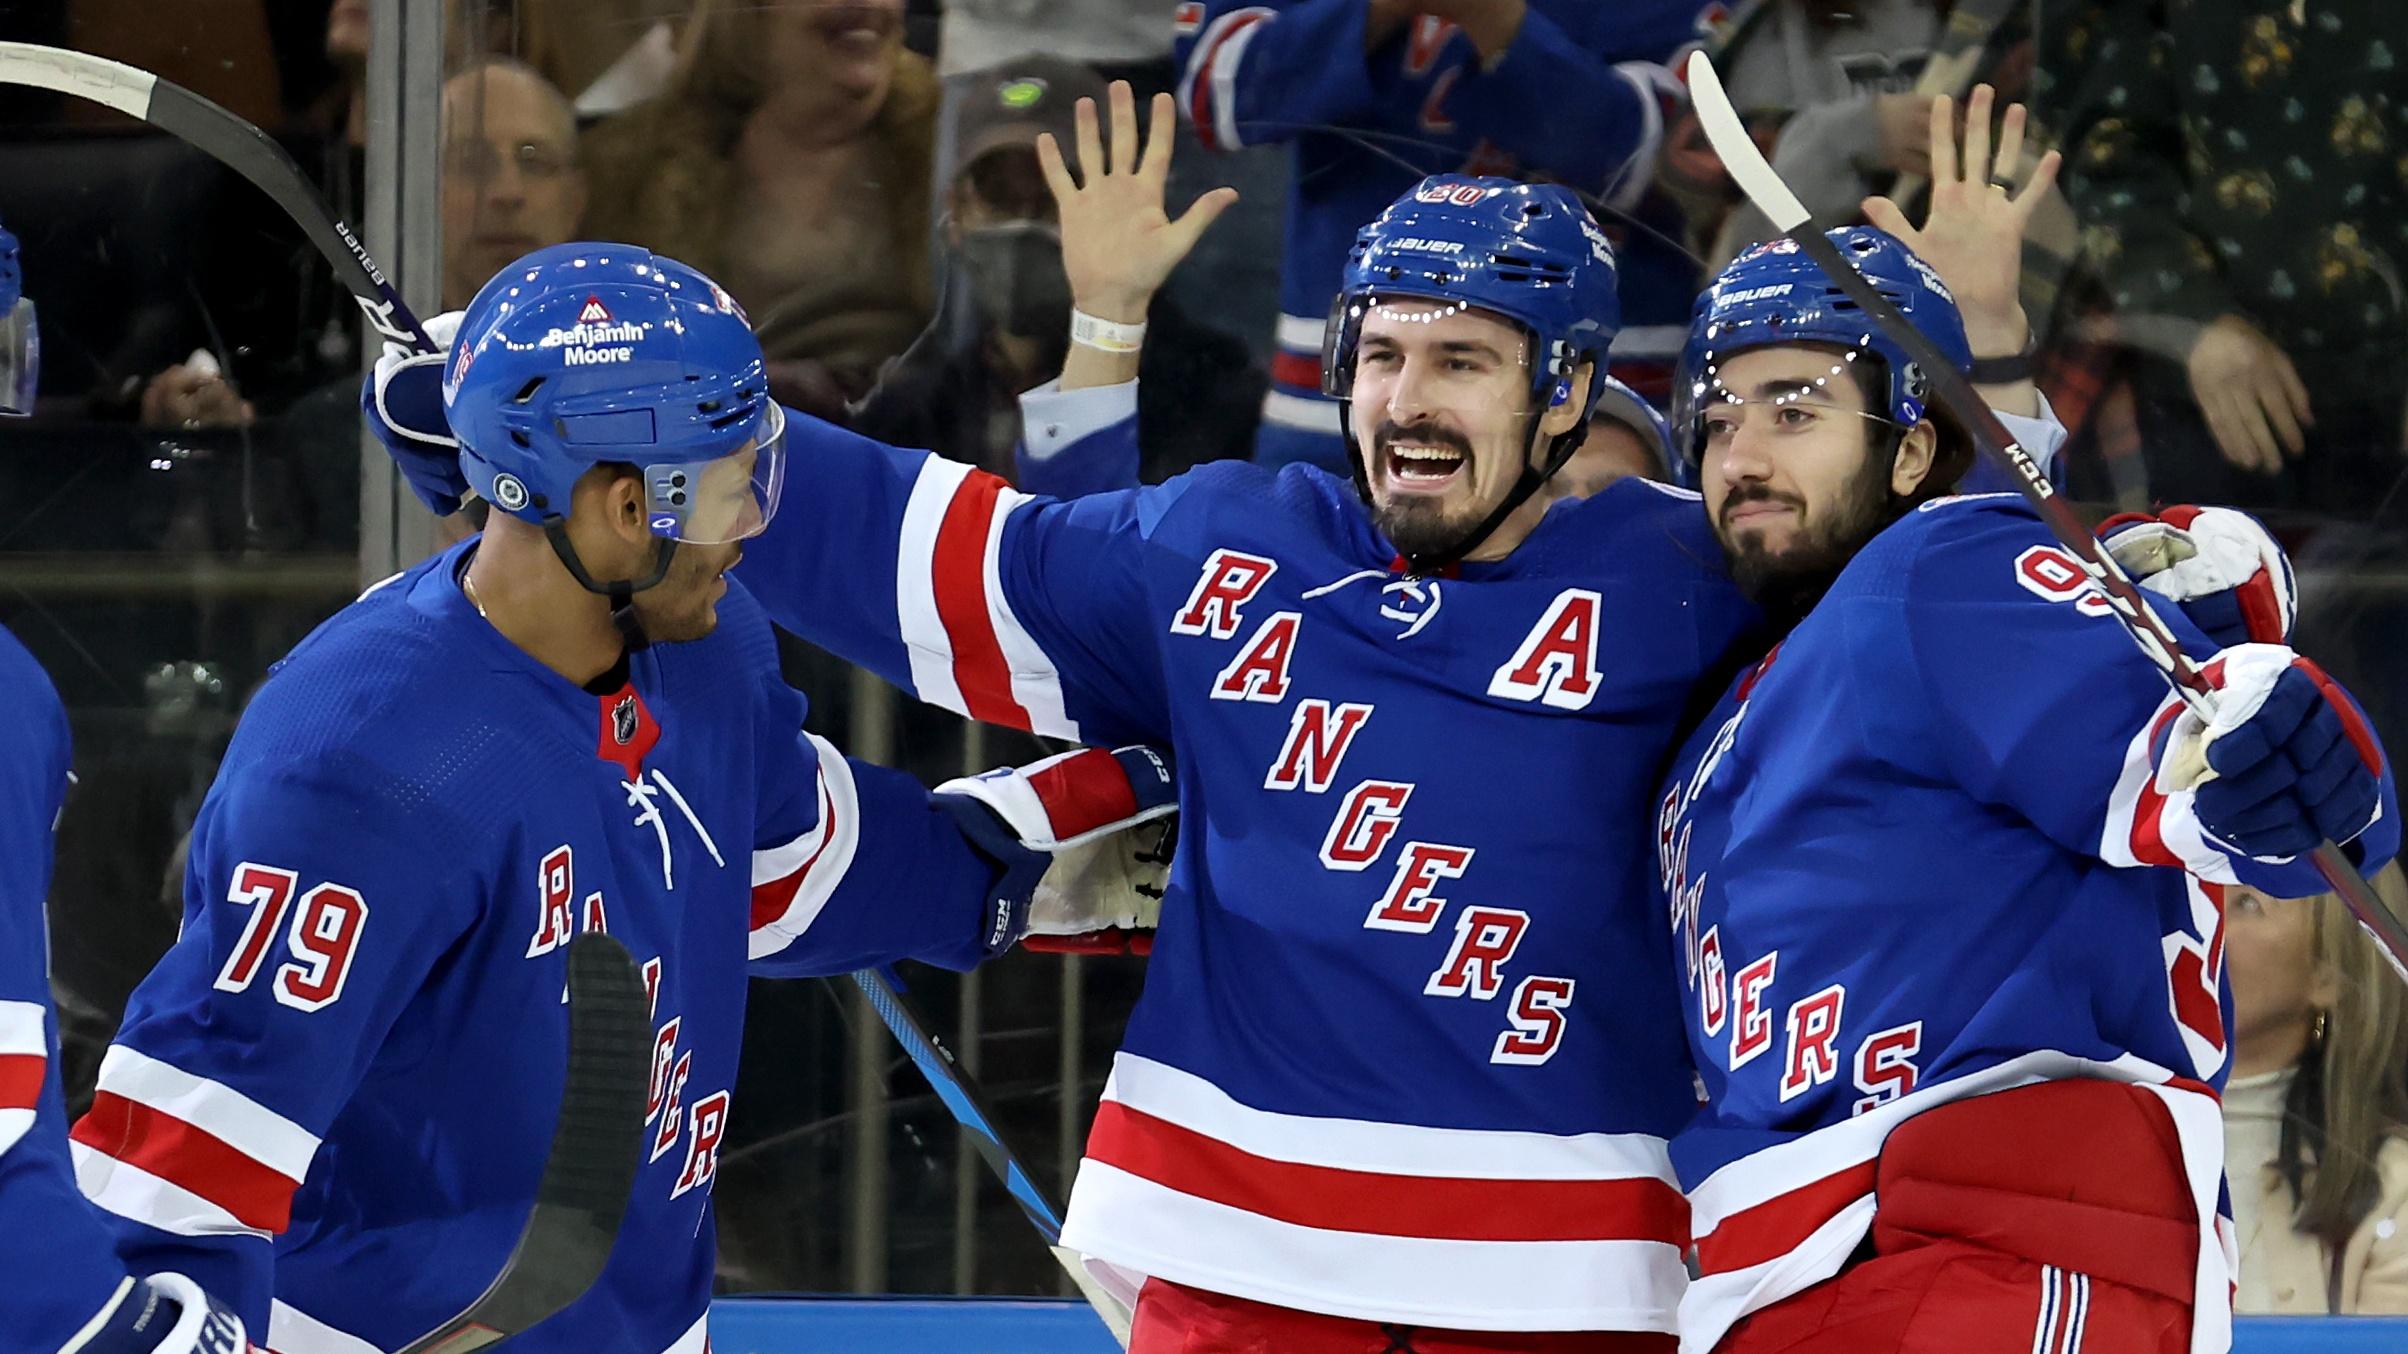 Mar 25, 2022; New York, New York, USA; New York Rangers left wing Chris Kreider (20) celebrates his goal against the Pittsburgh Penguins with defenseman Jacob Trouba (8) and defenseman K'Andre Miller (79) and center Mika Zibanejad (93) during the first period at Madison Square Garden. Mandatory Credit: Brad Penner-USA TODAY Sports / © Brad Penner-USA TODAY Sports